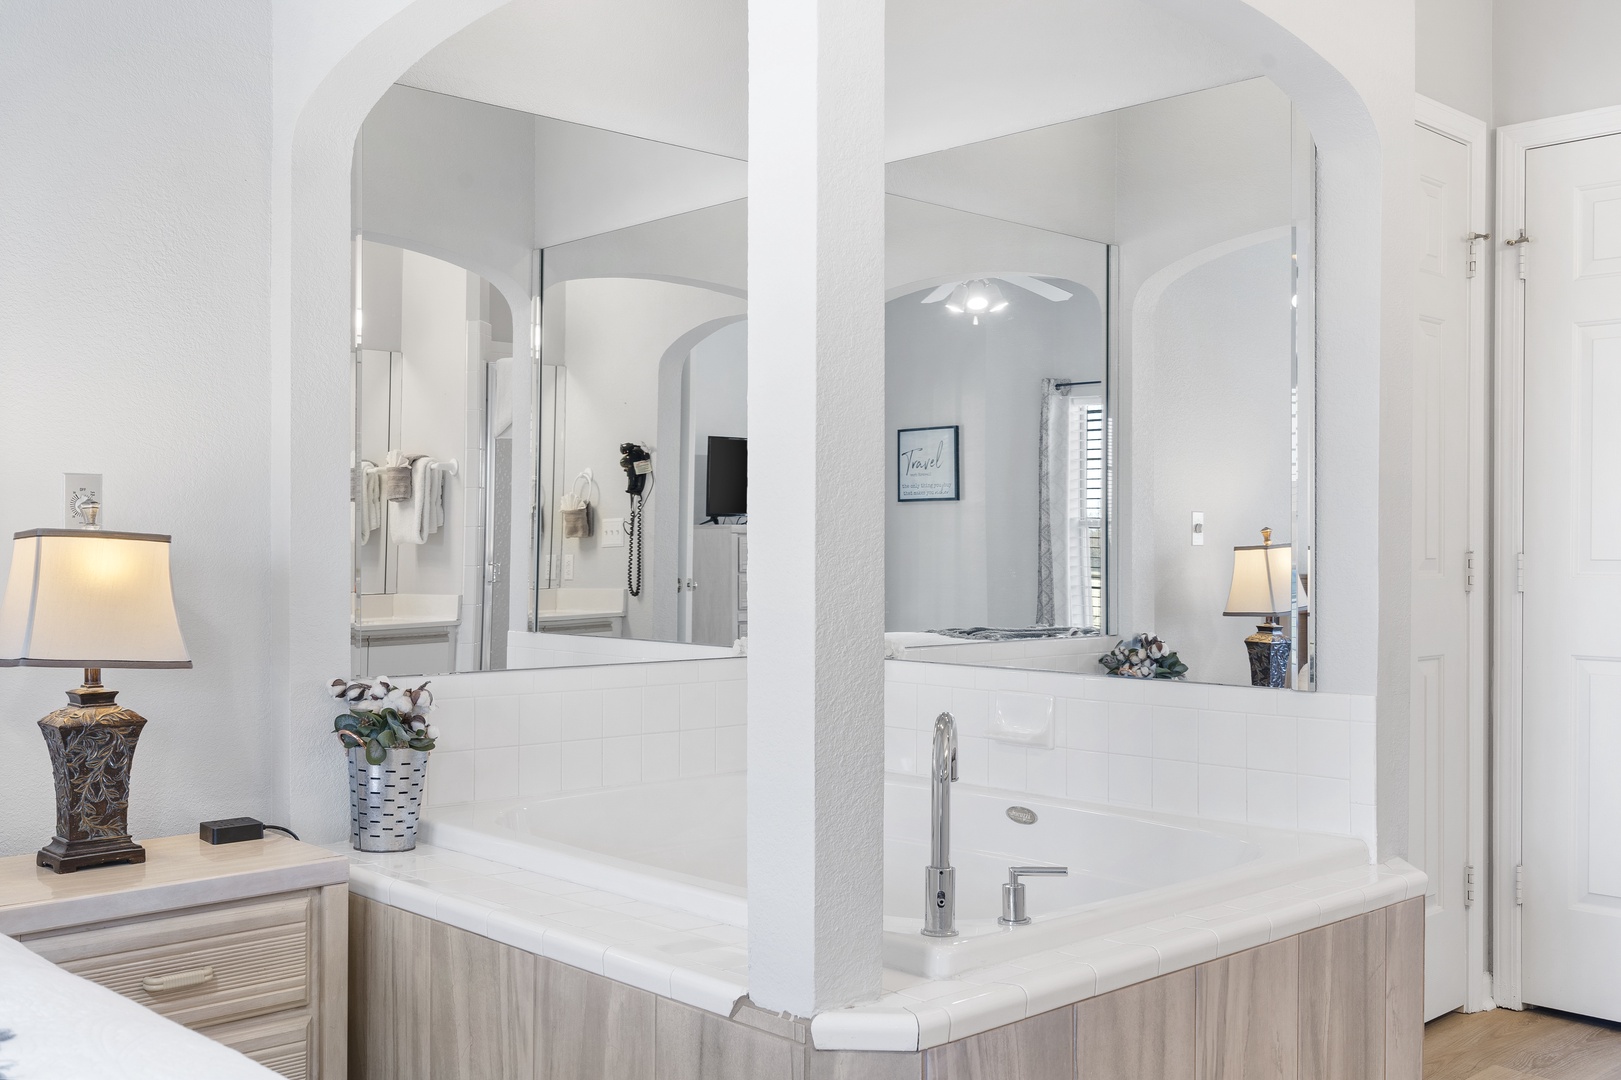 The king ensuite offers a double vanity, shower, & luxurious soaking tub